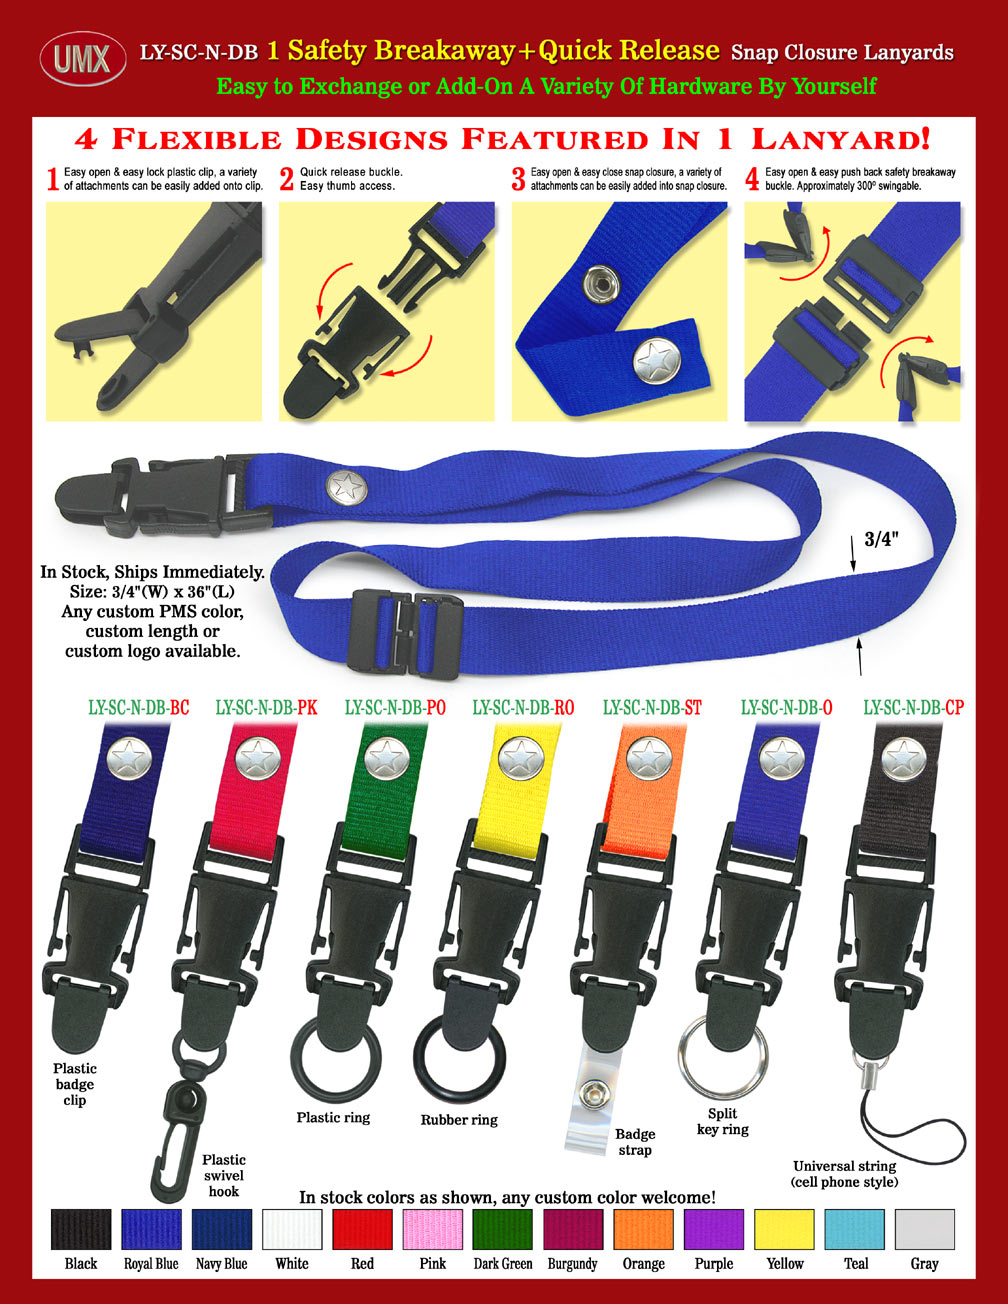 Quick Release Snap Closure Safety Lanyards, there are 4-locations can be easily released and closed for exchanging or add-on different hardware.